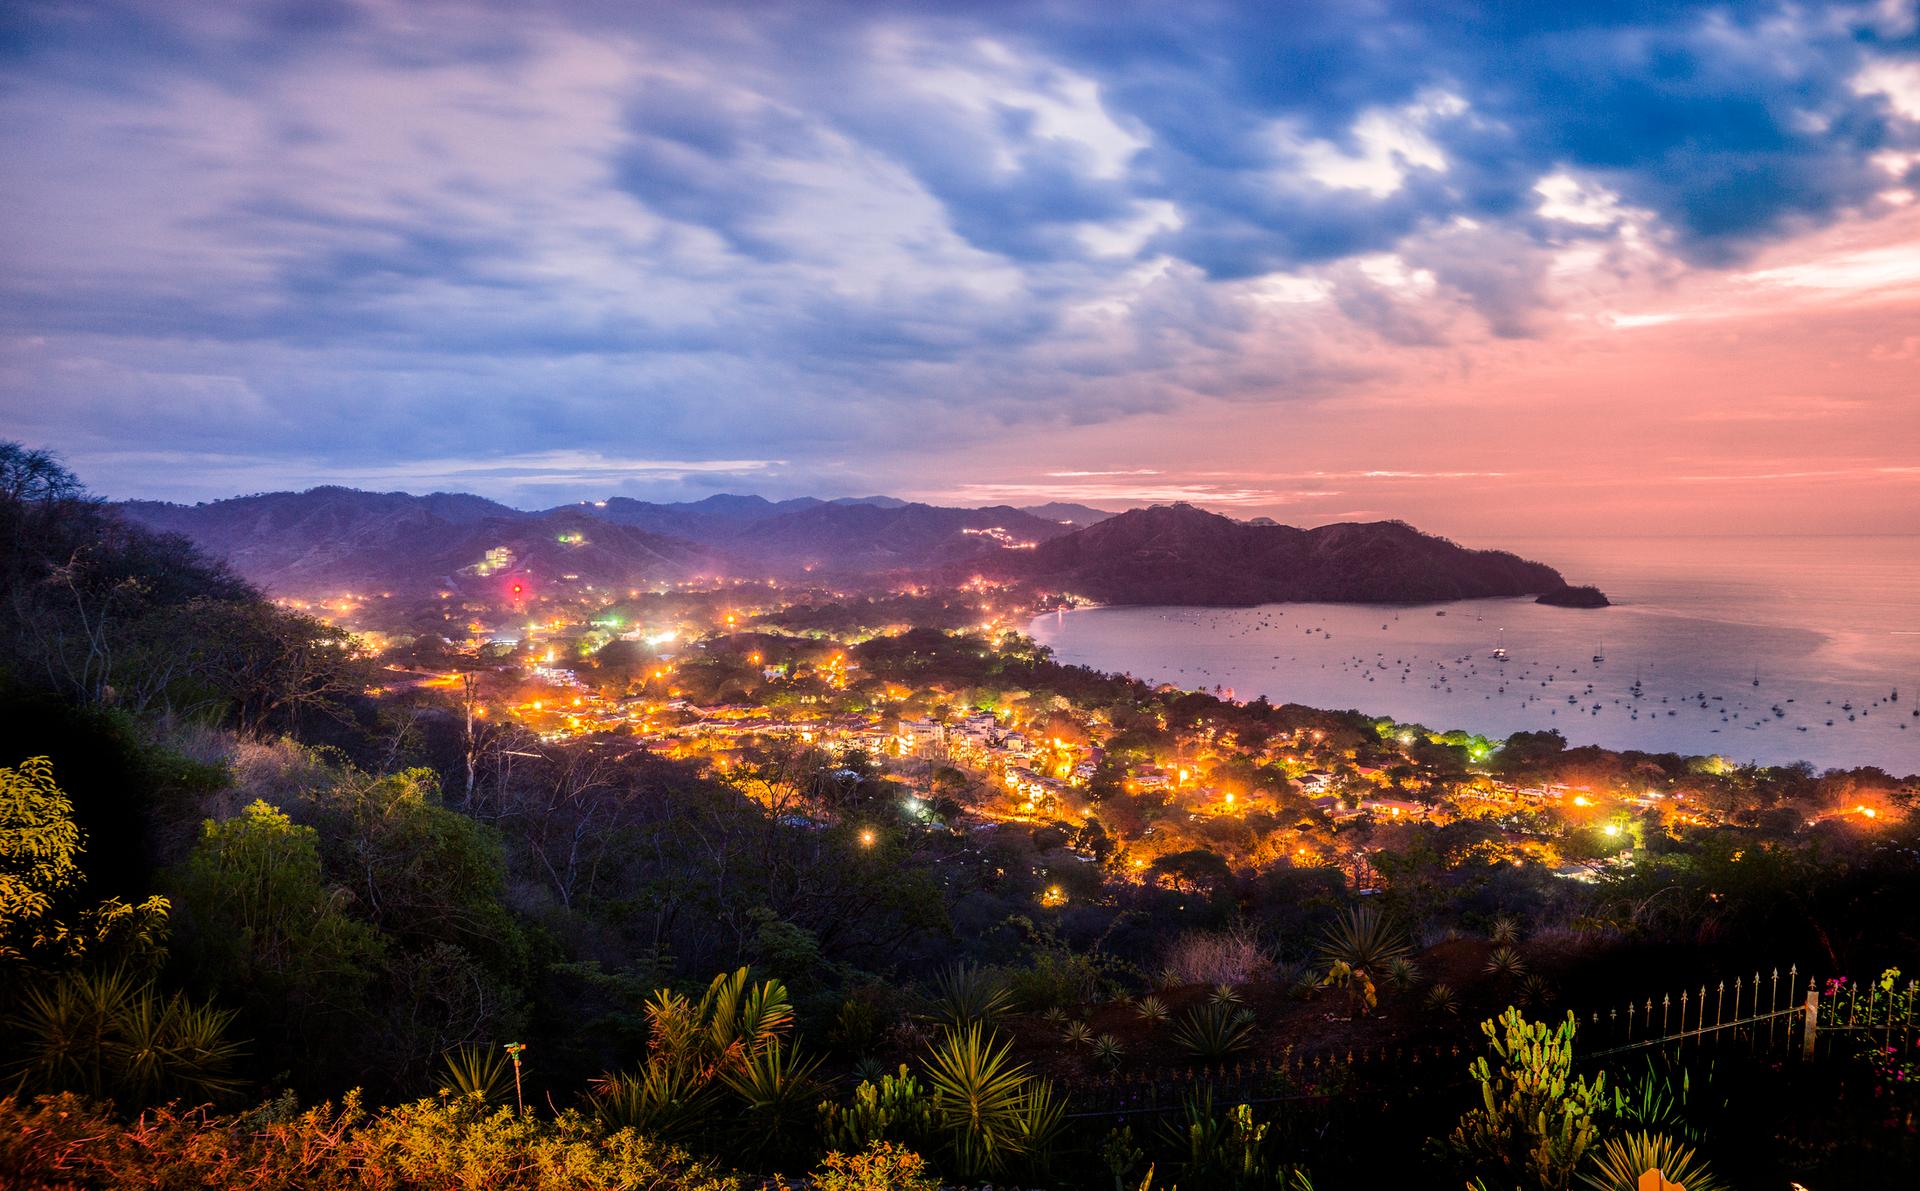 Looking down on Playas del Coco, Guanacaste, Costa Rica at night. The computer networks of dozens of Costa Rican ministries were infected with ransomware and a national emergency was declared in May by incoming President Rodrigo Chaves Robles shortly after he was sworn in. (Photo Credit: Fertnig via Getty)